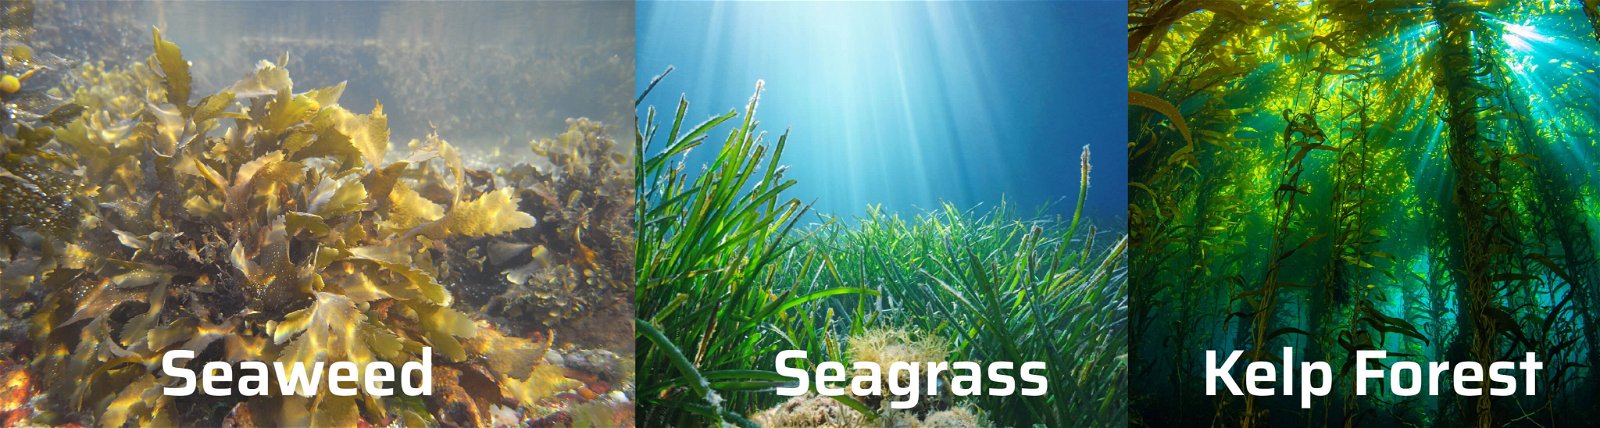 Seaweed Seagrass Kelp Forest